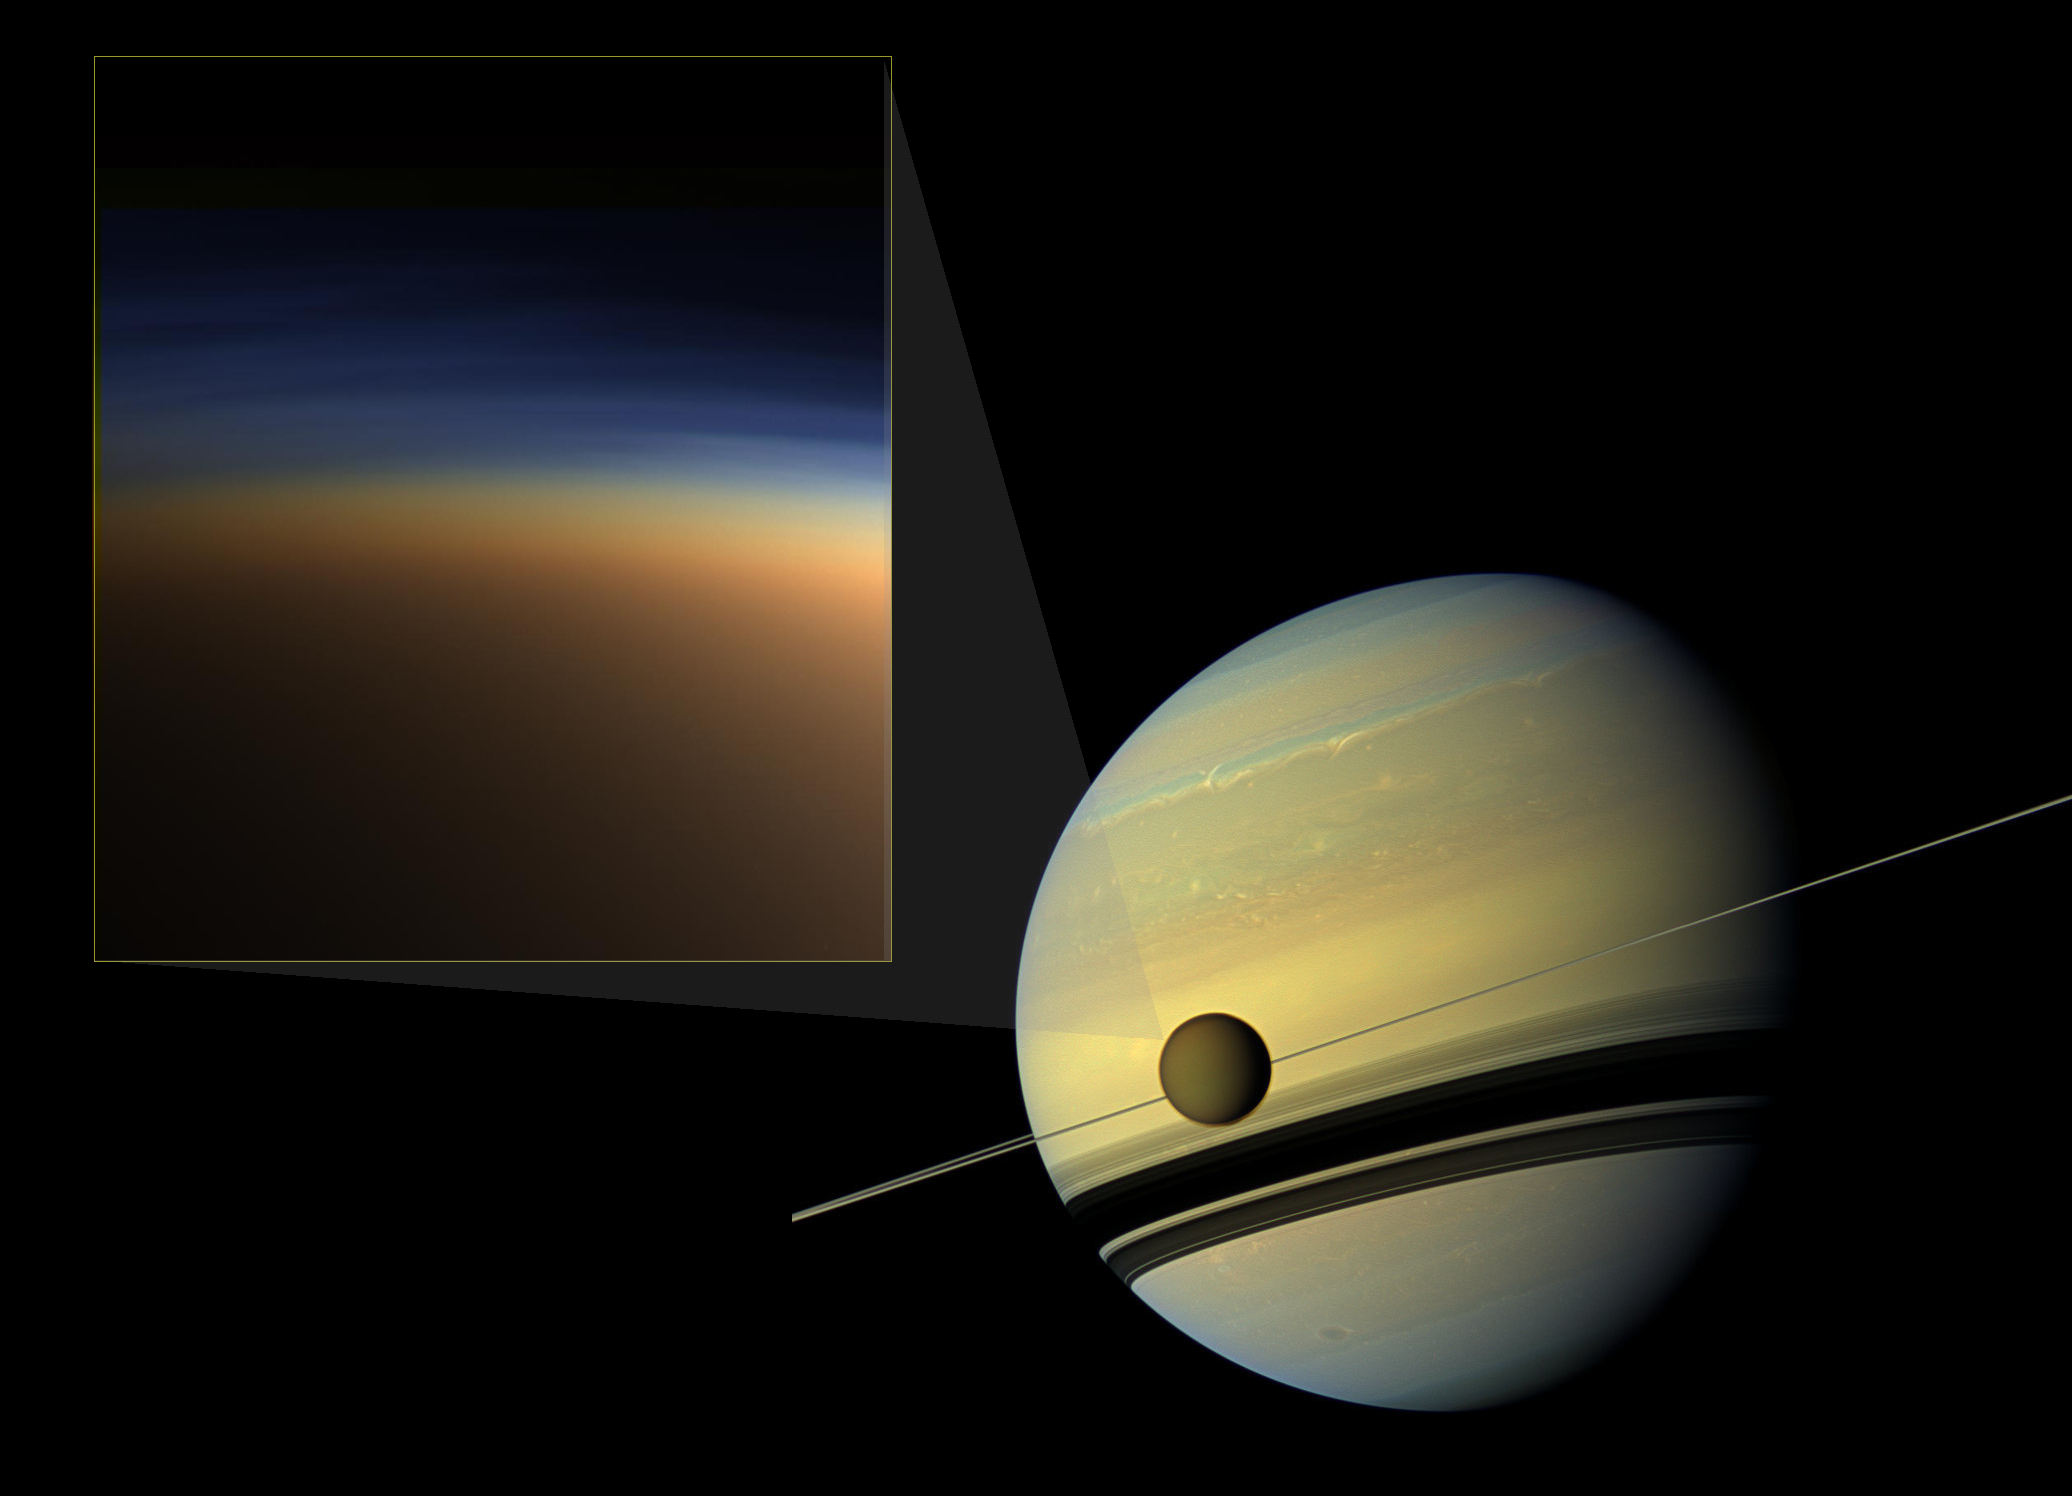 Image - The atmospheric haze of Titan, Saturn’s largest moon (pictured here along Saturn’s midsection), is captured in this natural-color image (box at left). A new study, which involved X-ray experiments at Berkeley Lab’s Advanced Light Source, has revealed new clues that may help to unravel the formation of this haze. (Credits: NASA Jet Propulsion Laboratory, Space Science Institute, Caltech)